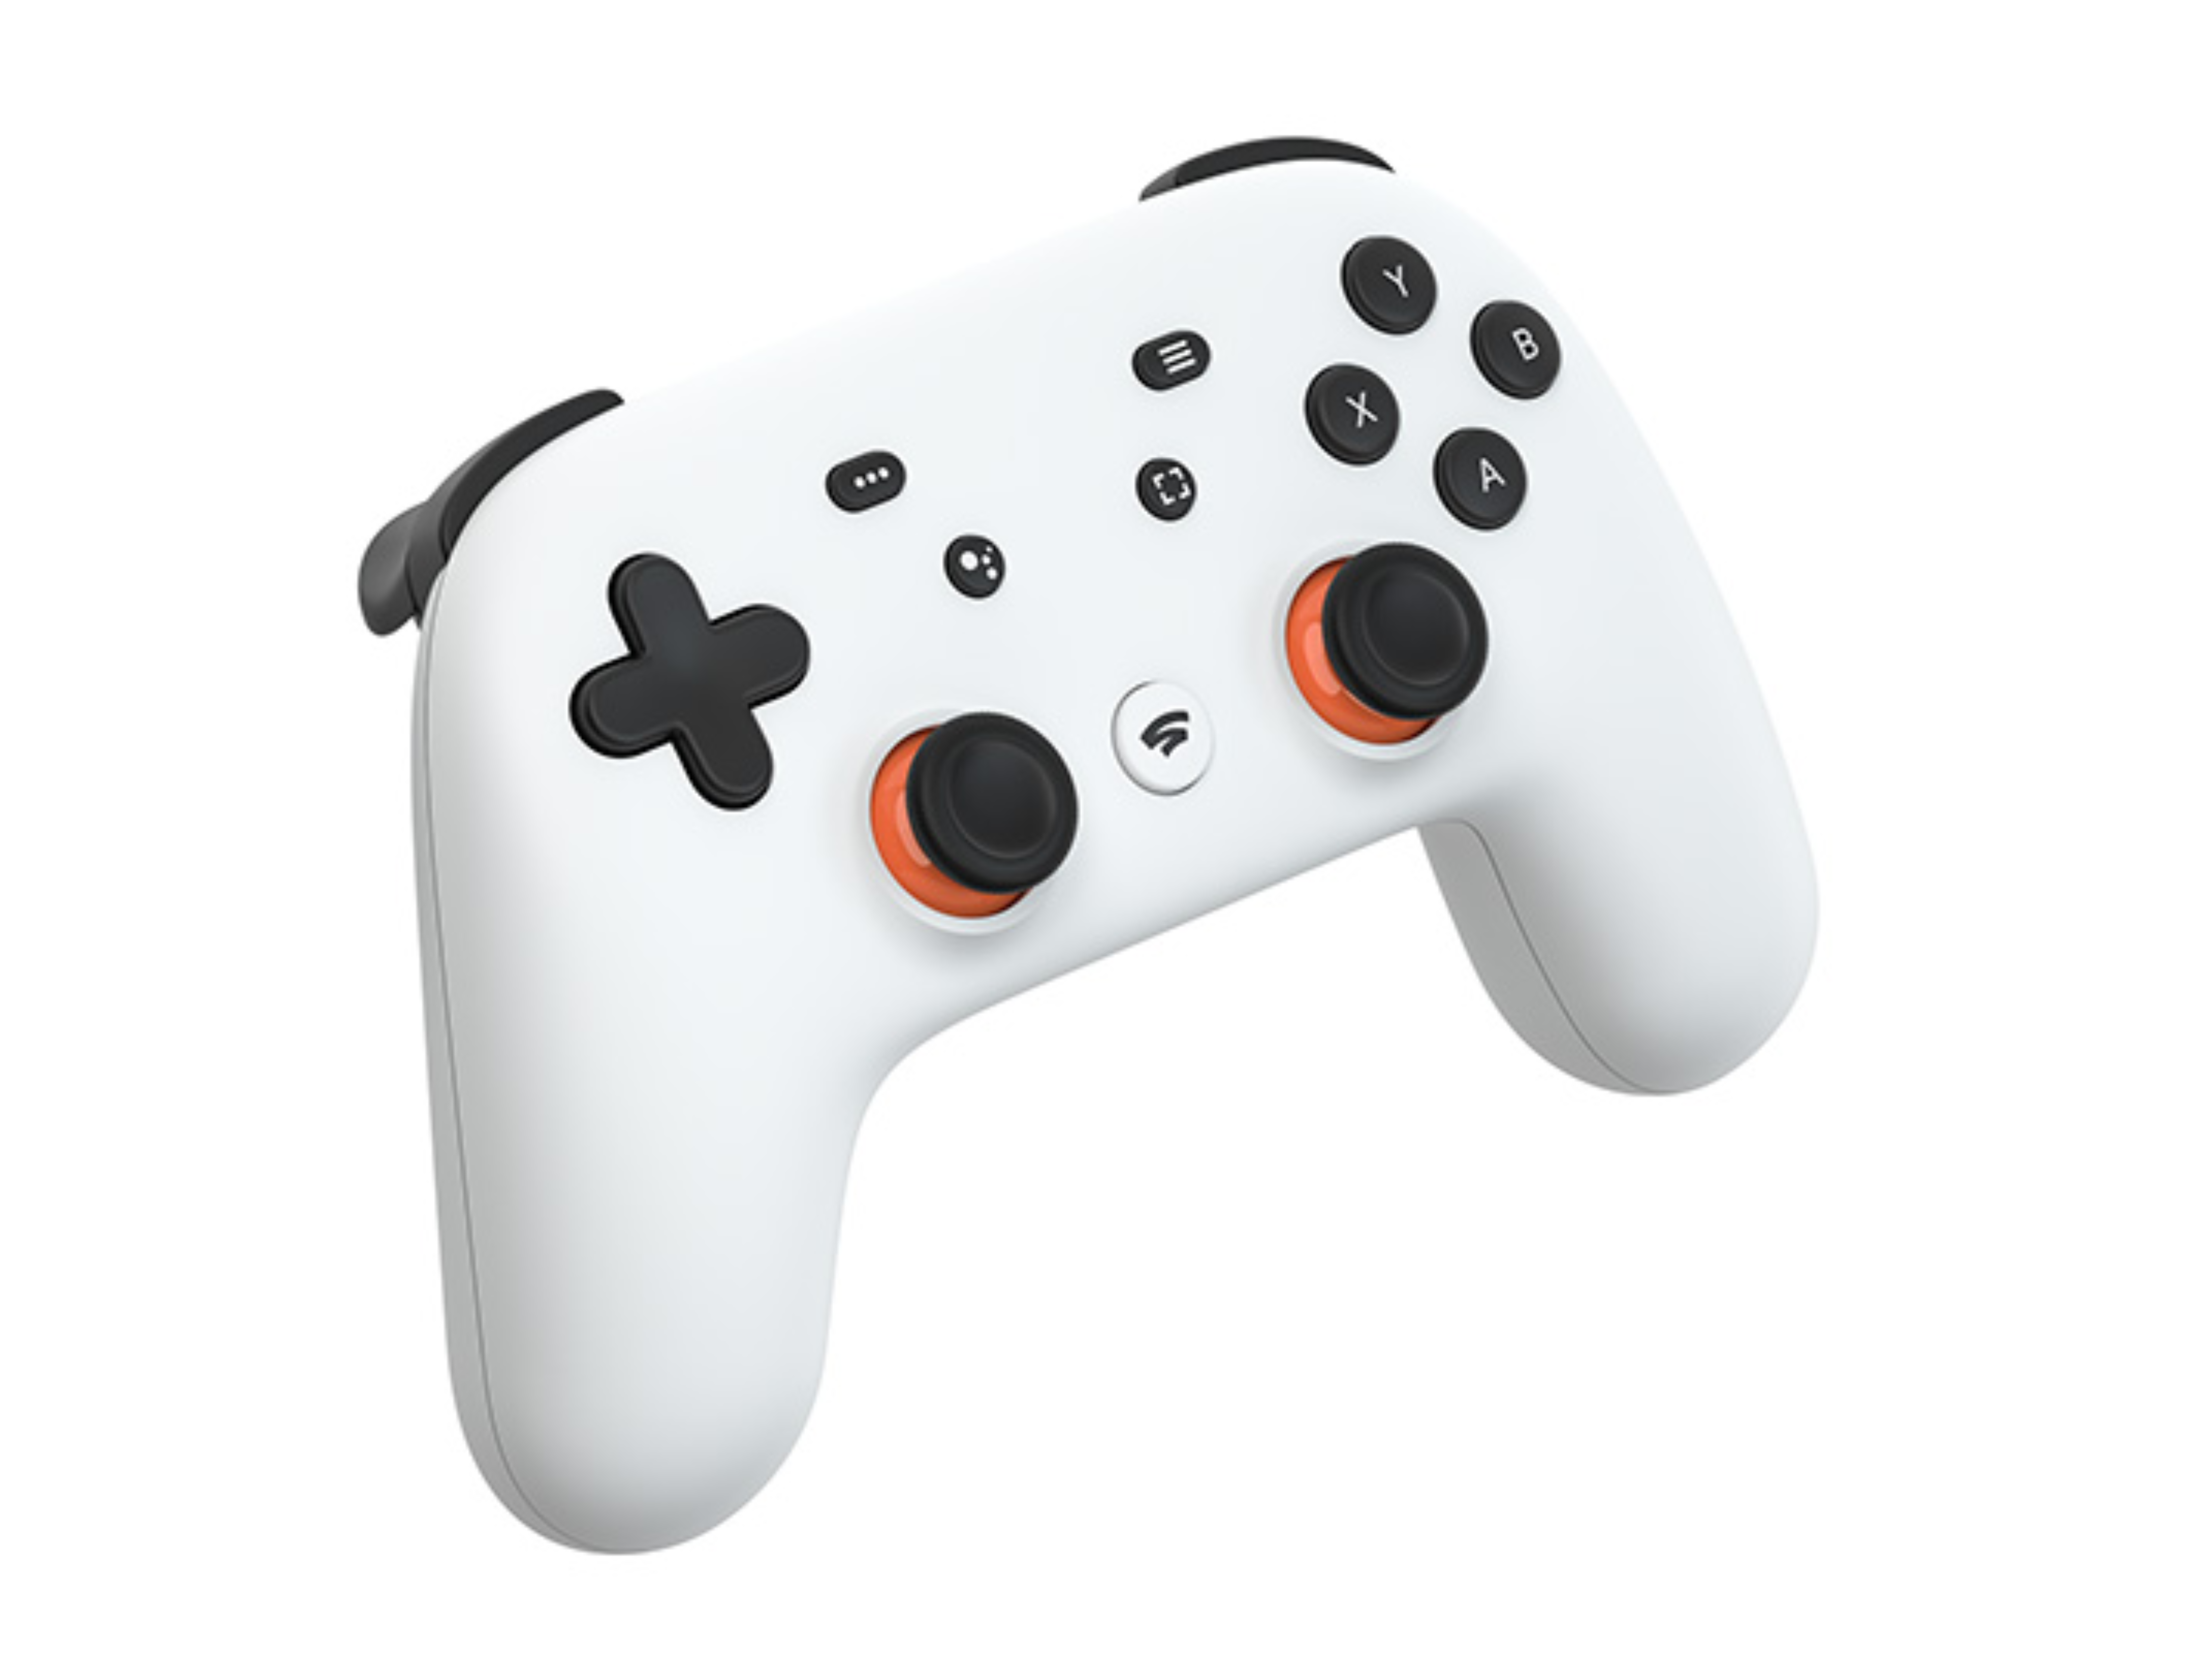 How to get Stadia Pro free for 6-months and only pay $20 for a Stadia controller